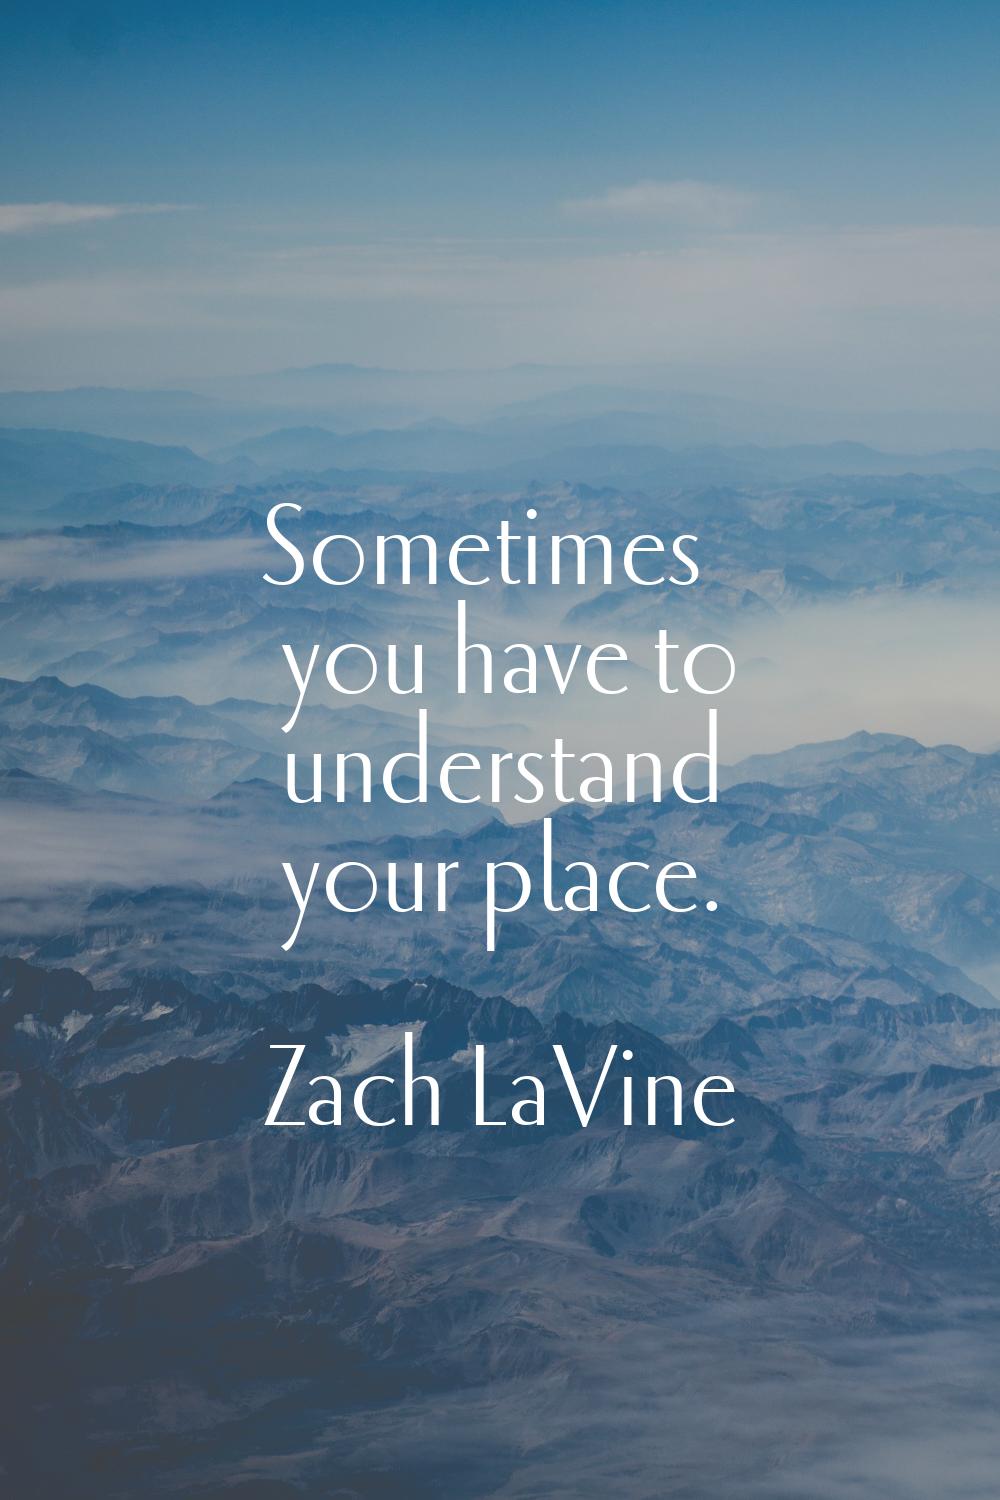 Sometimes you have to understand your place.